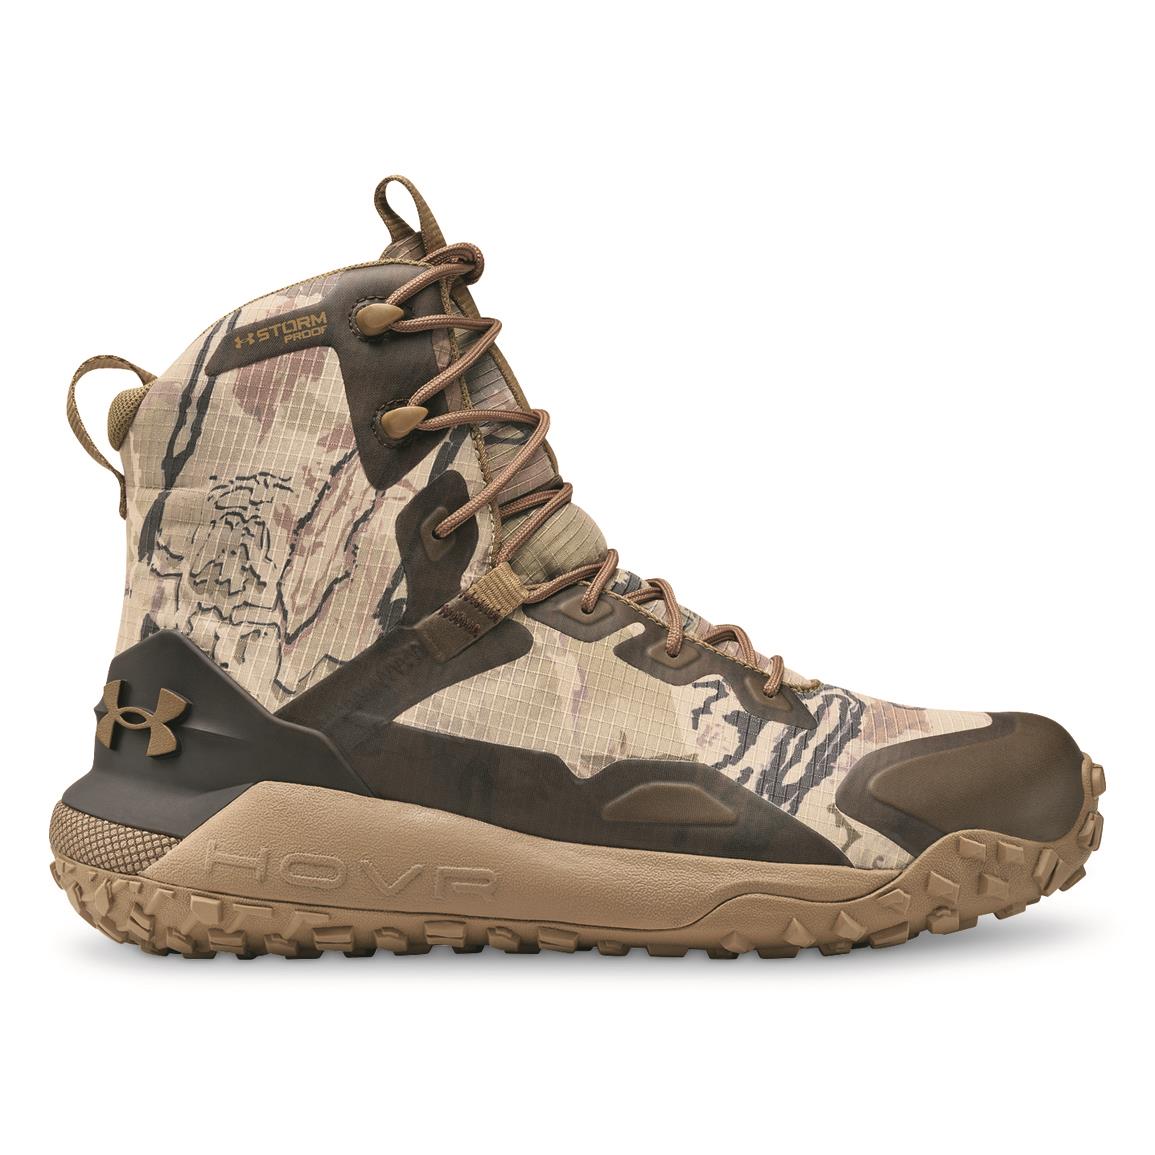 Under Armour Hunting Boots | Sportsman's Guide